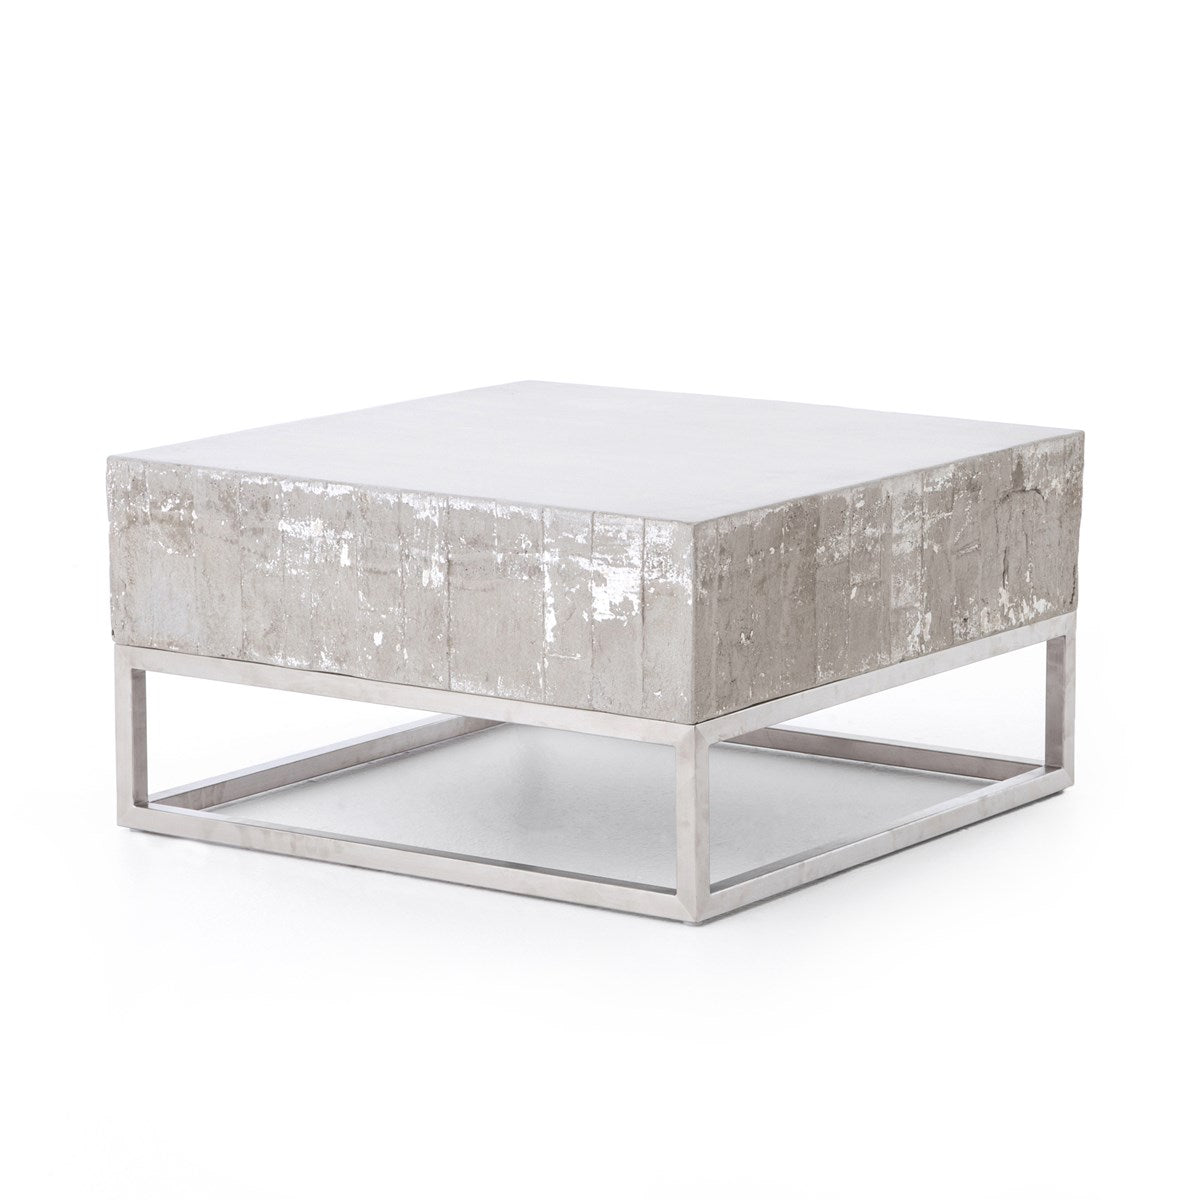 Concrete and Chrome Coffee Table Coffee Table Four Hands     Four Hands, Burke Decor, Mid Century Modern Furniture, Old Bones Furniture Company, Old Bones Co, Modern Mid Century, Designer Furniture, https://www.oldbonesco.com/